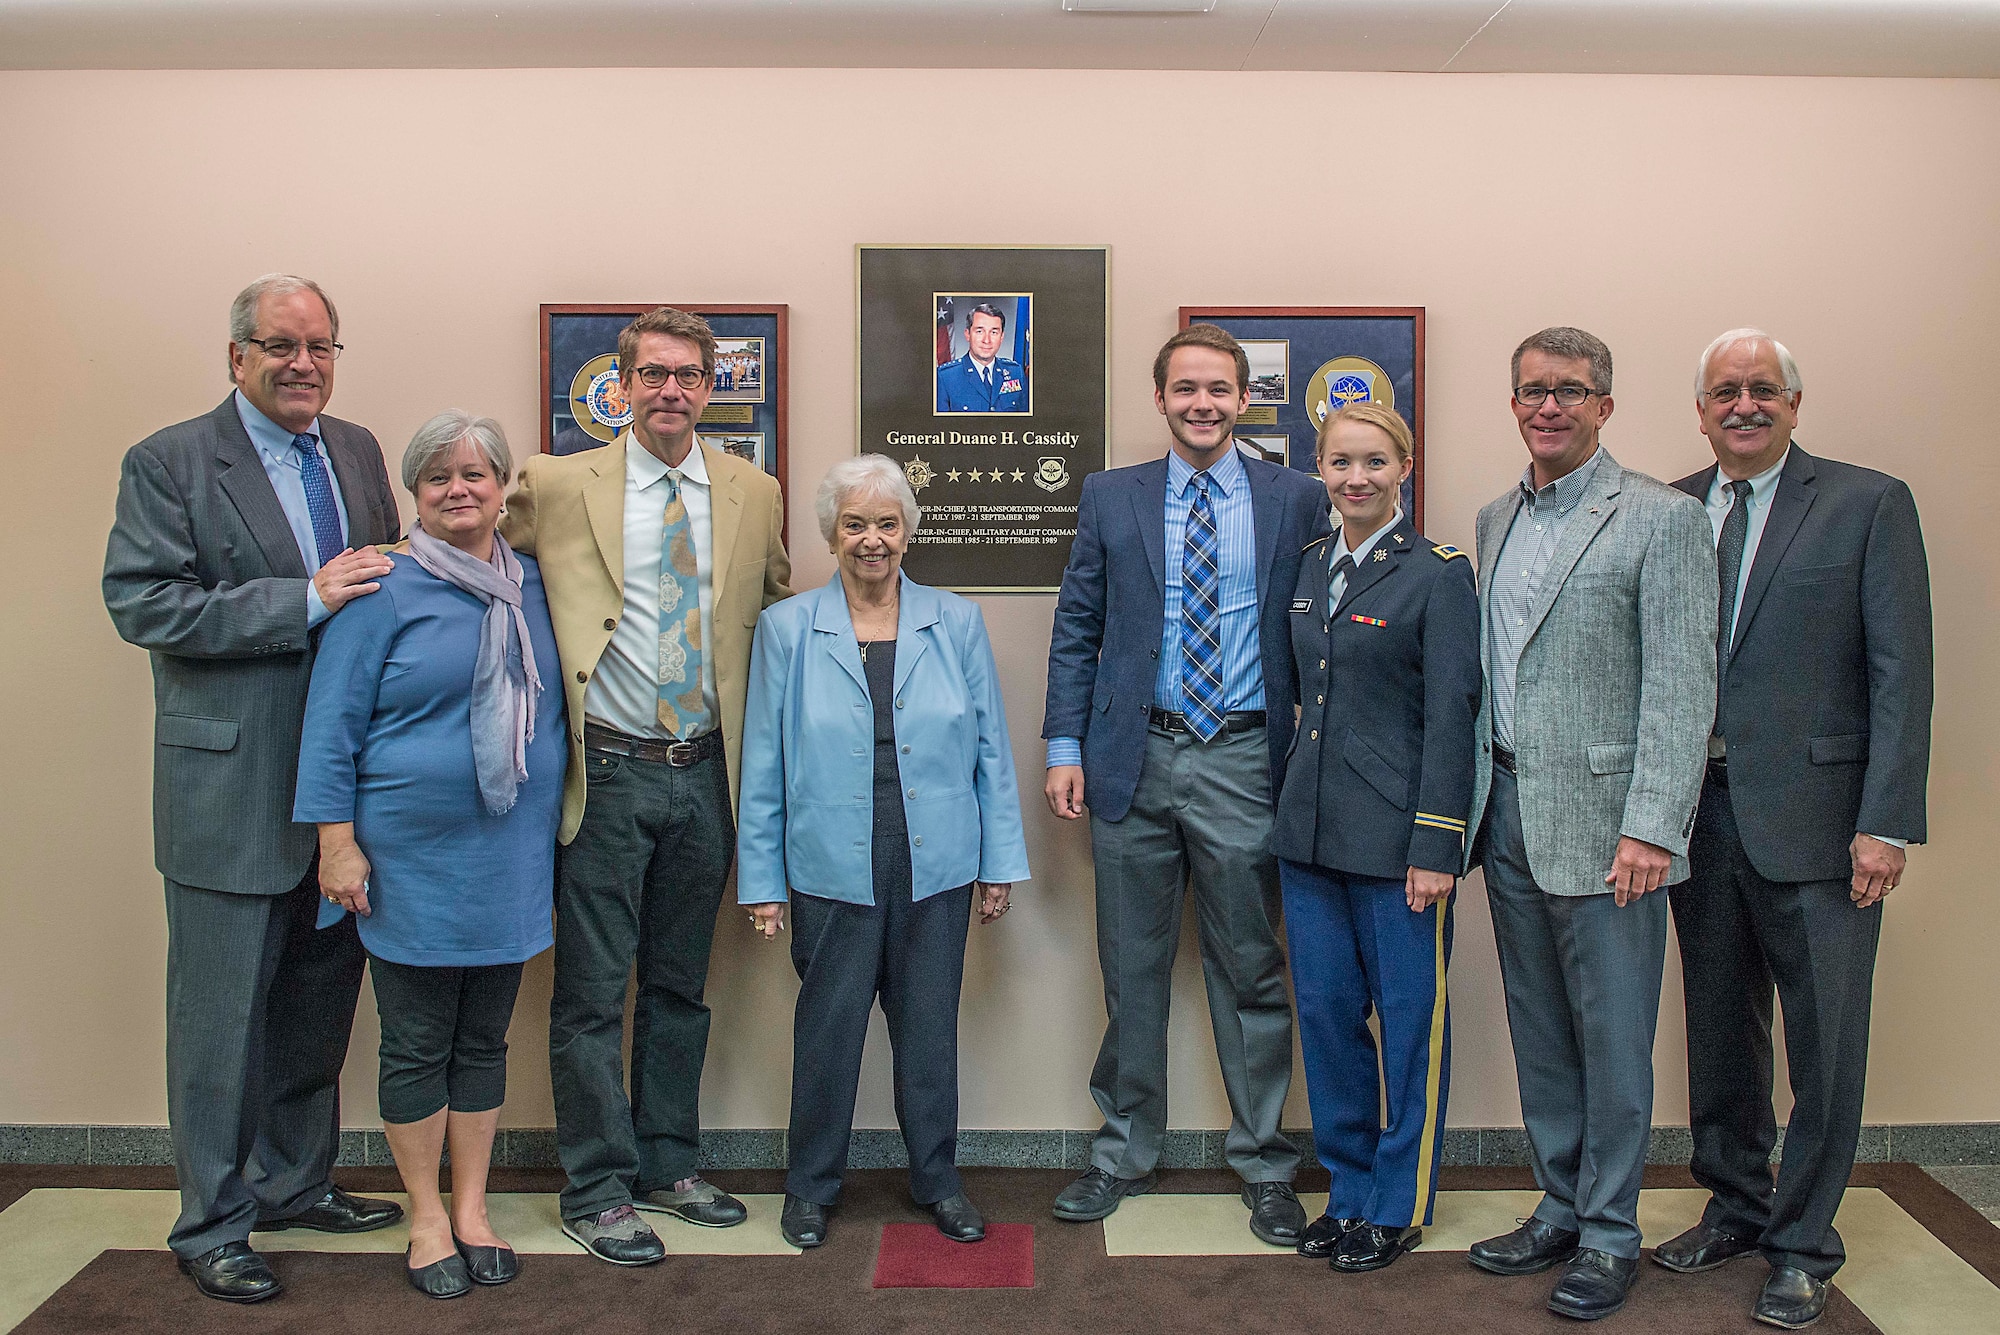 Members of the Cassidy family gather in front of a display honoring Gen. Duane H. Cassidy prior to a dedication ceremony renaming the Global Reach and Planning Center to the Gen. Duane H. Cassidy Conference Center, at Scott Air Force Base, Ill., Oct. 6, 2017.